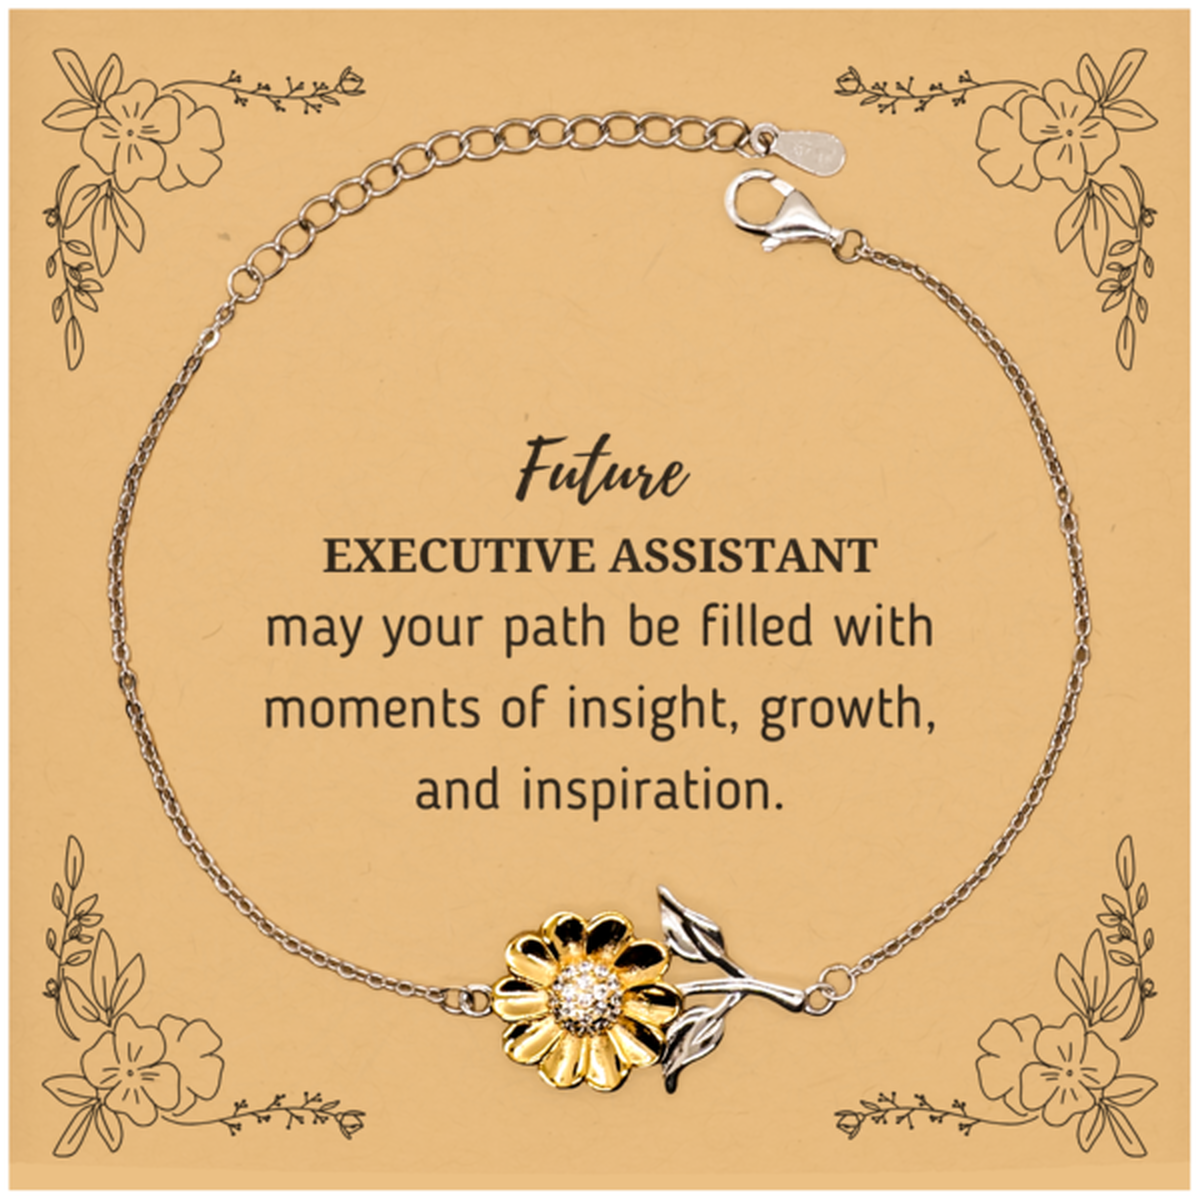 Future Executive Assistant Gifts, May your path be filled with moments of insight, Graduation Gifts for New Executive Assistant, Christmas Unique Sunflower Bracelet For Men, Women, Friends